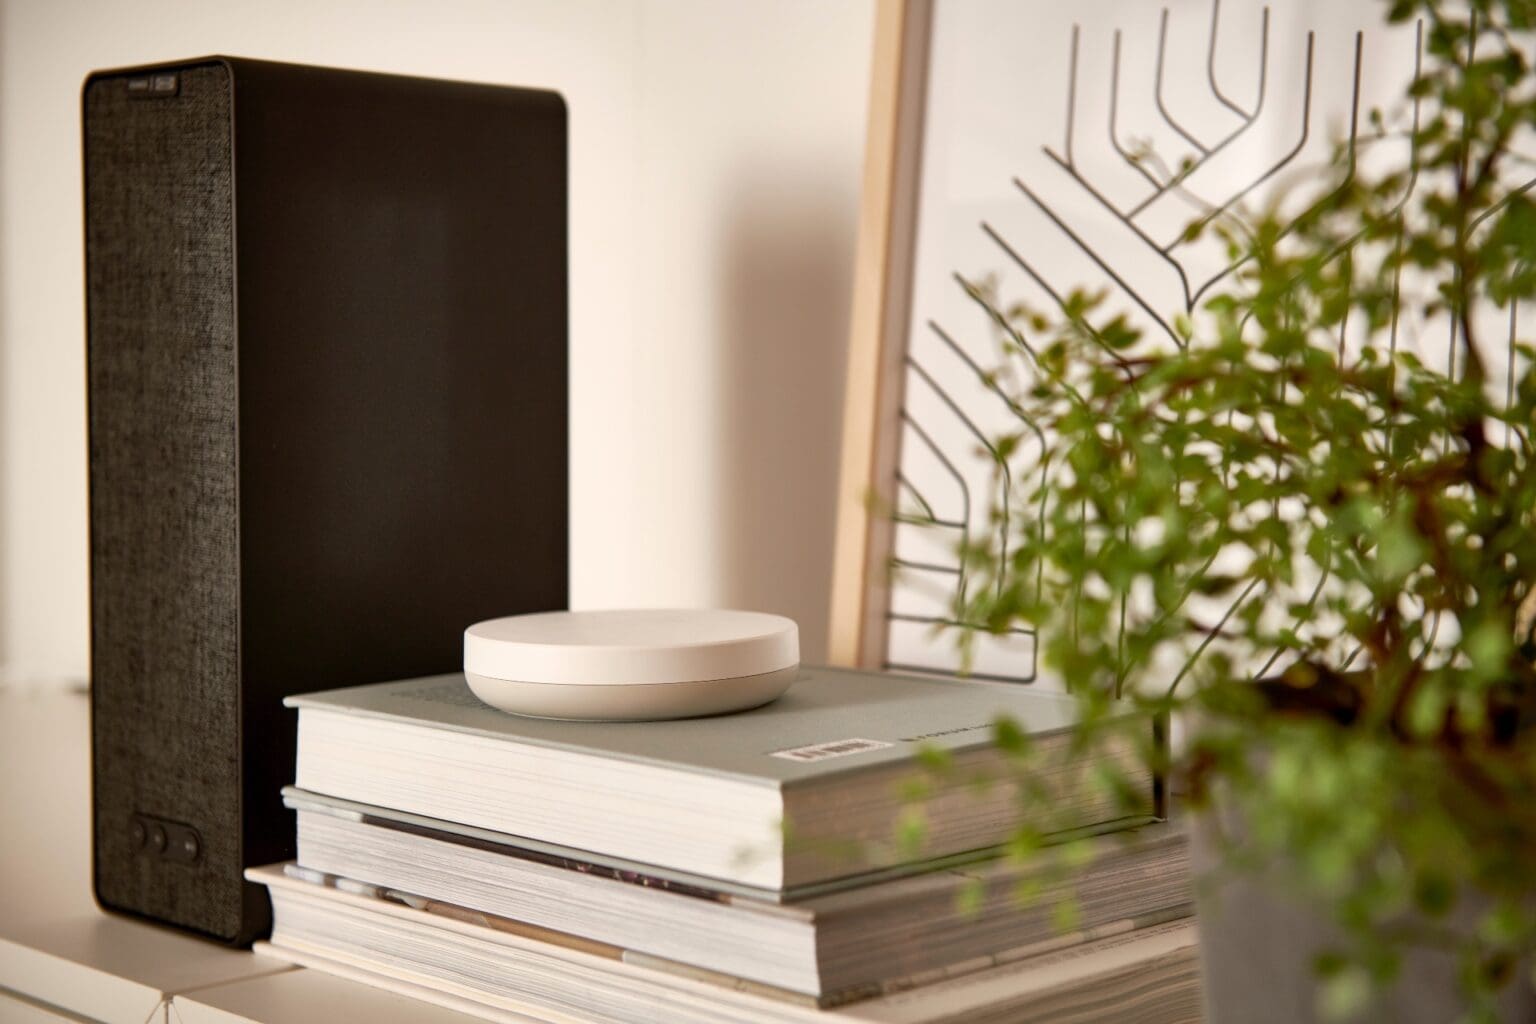 Ikea will launch a new smart home hub and Home app with support for the new Matter standard.